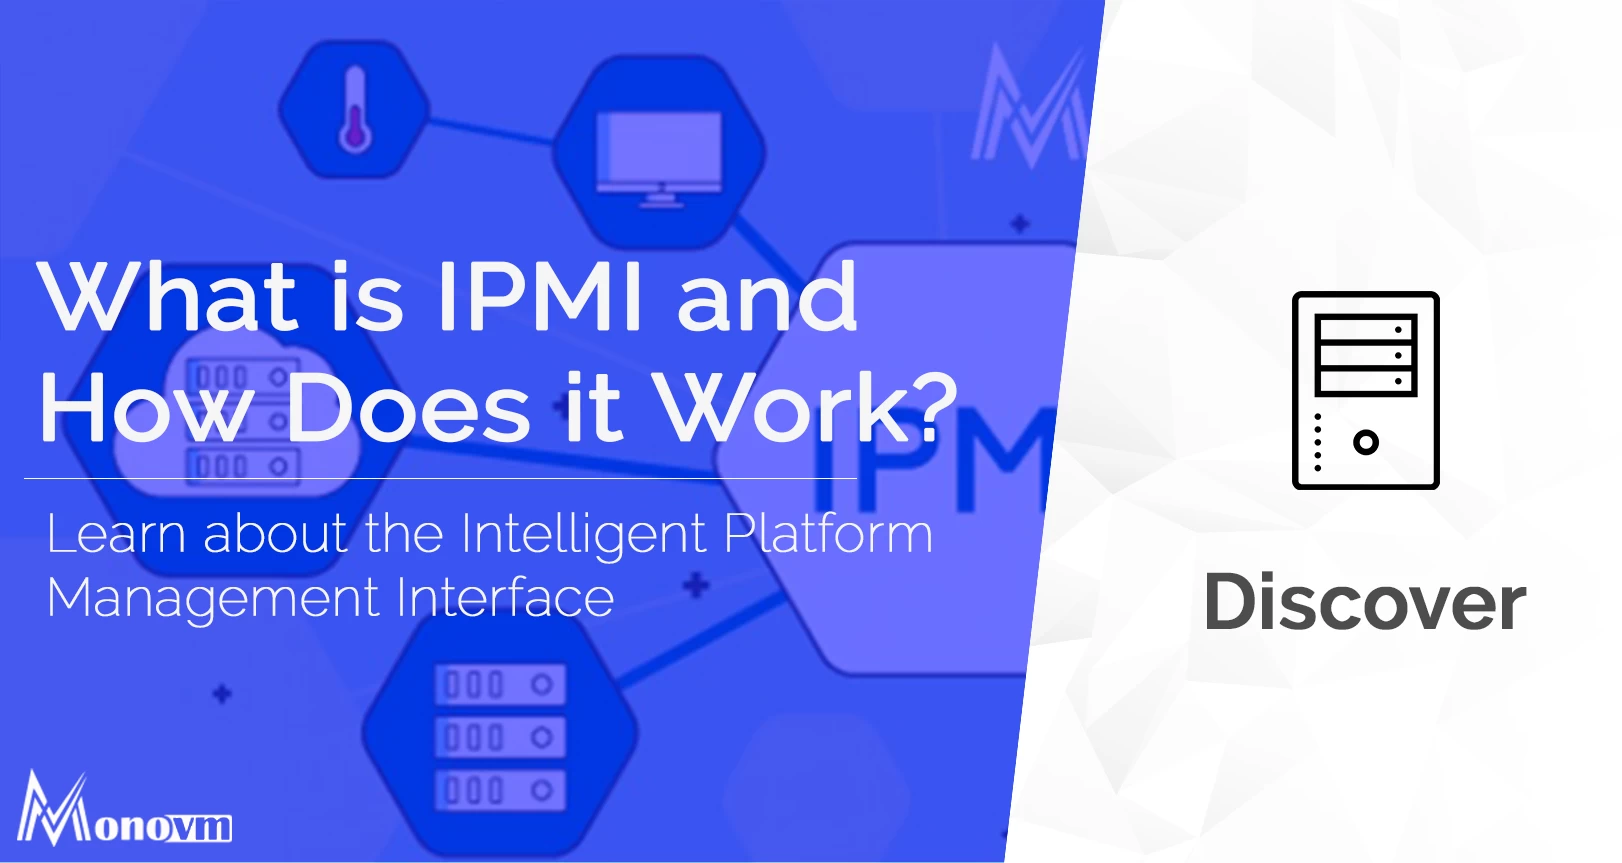 What is IPMI?